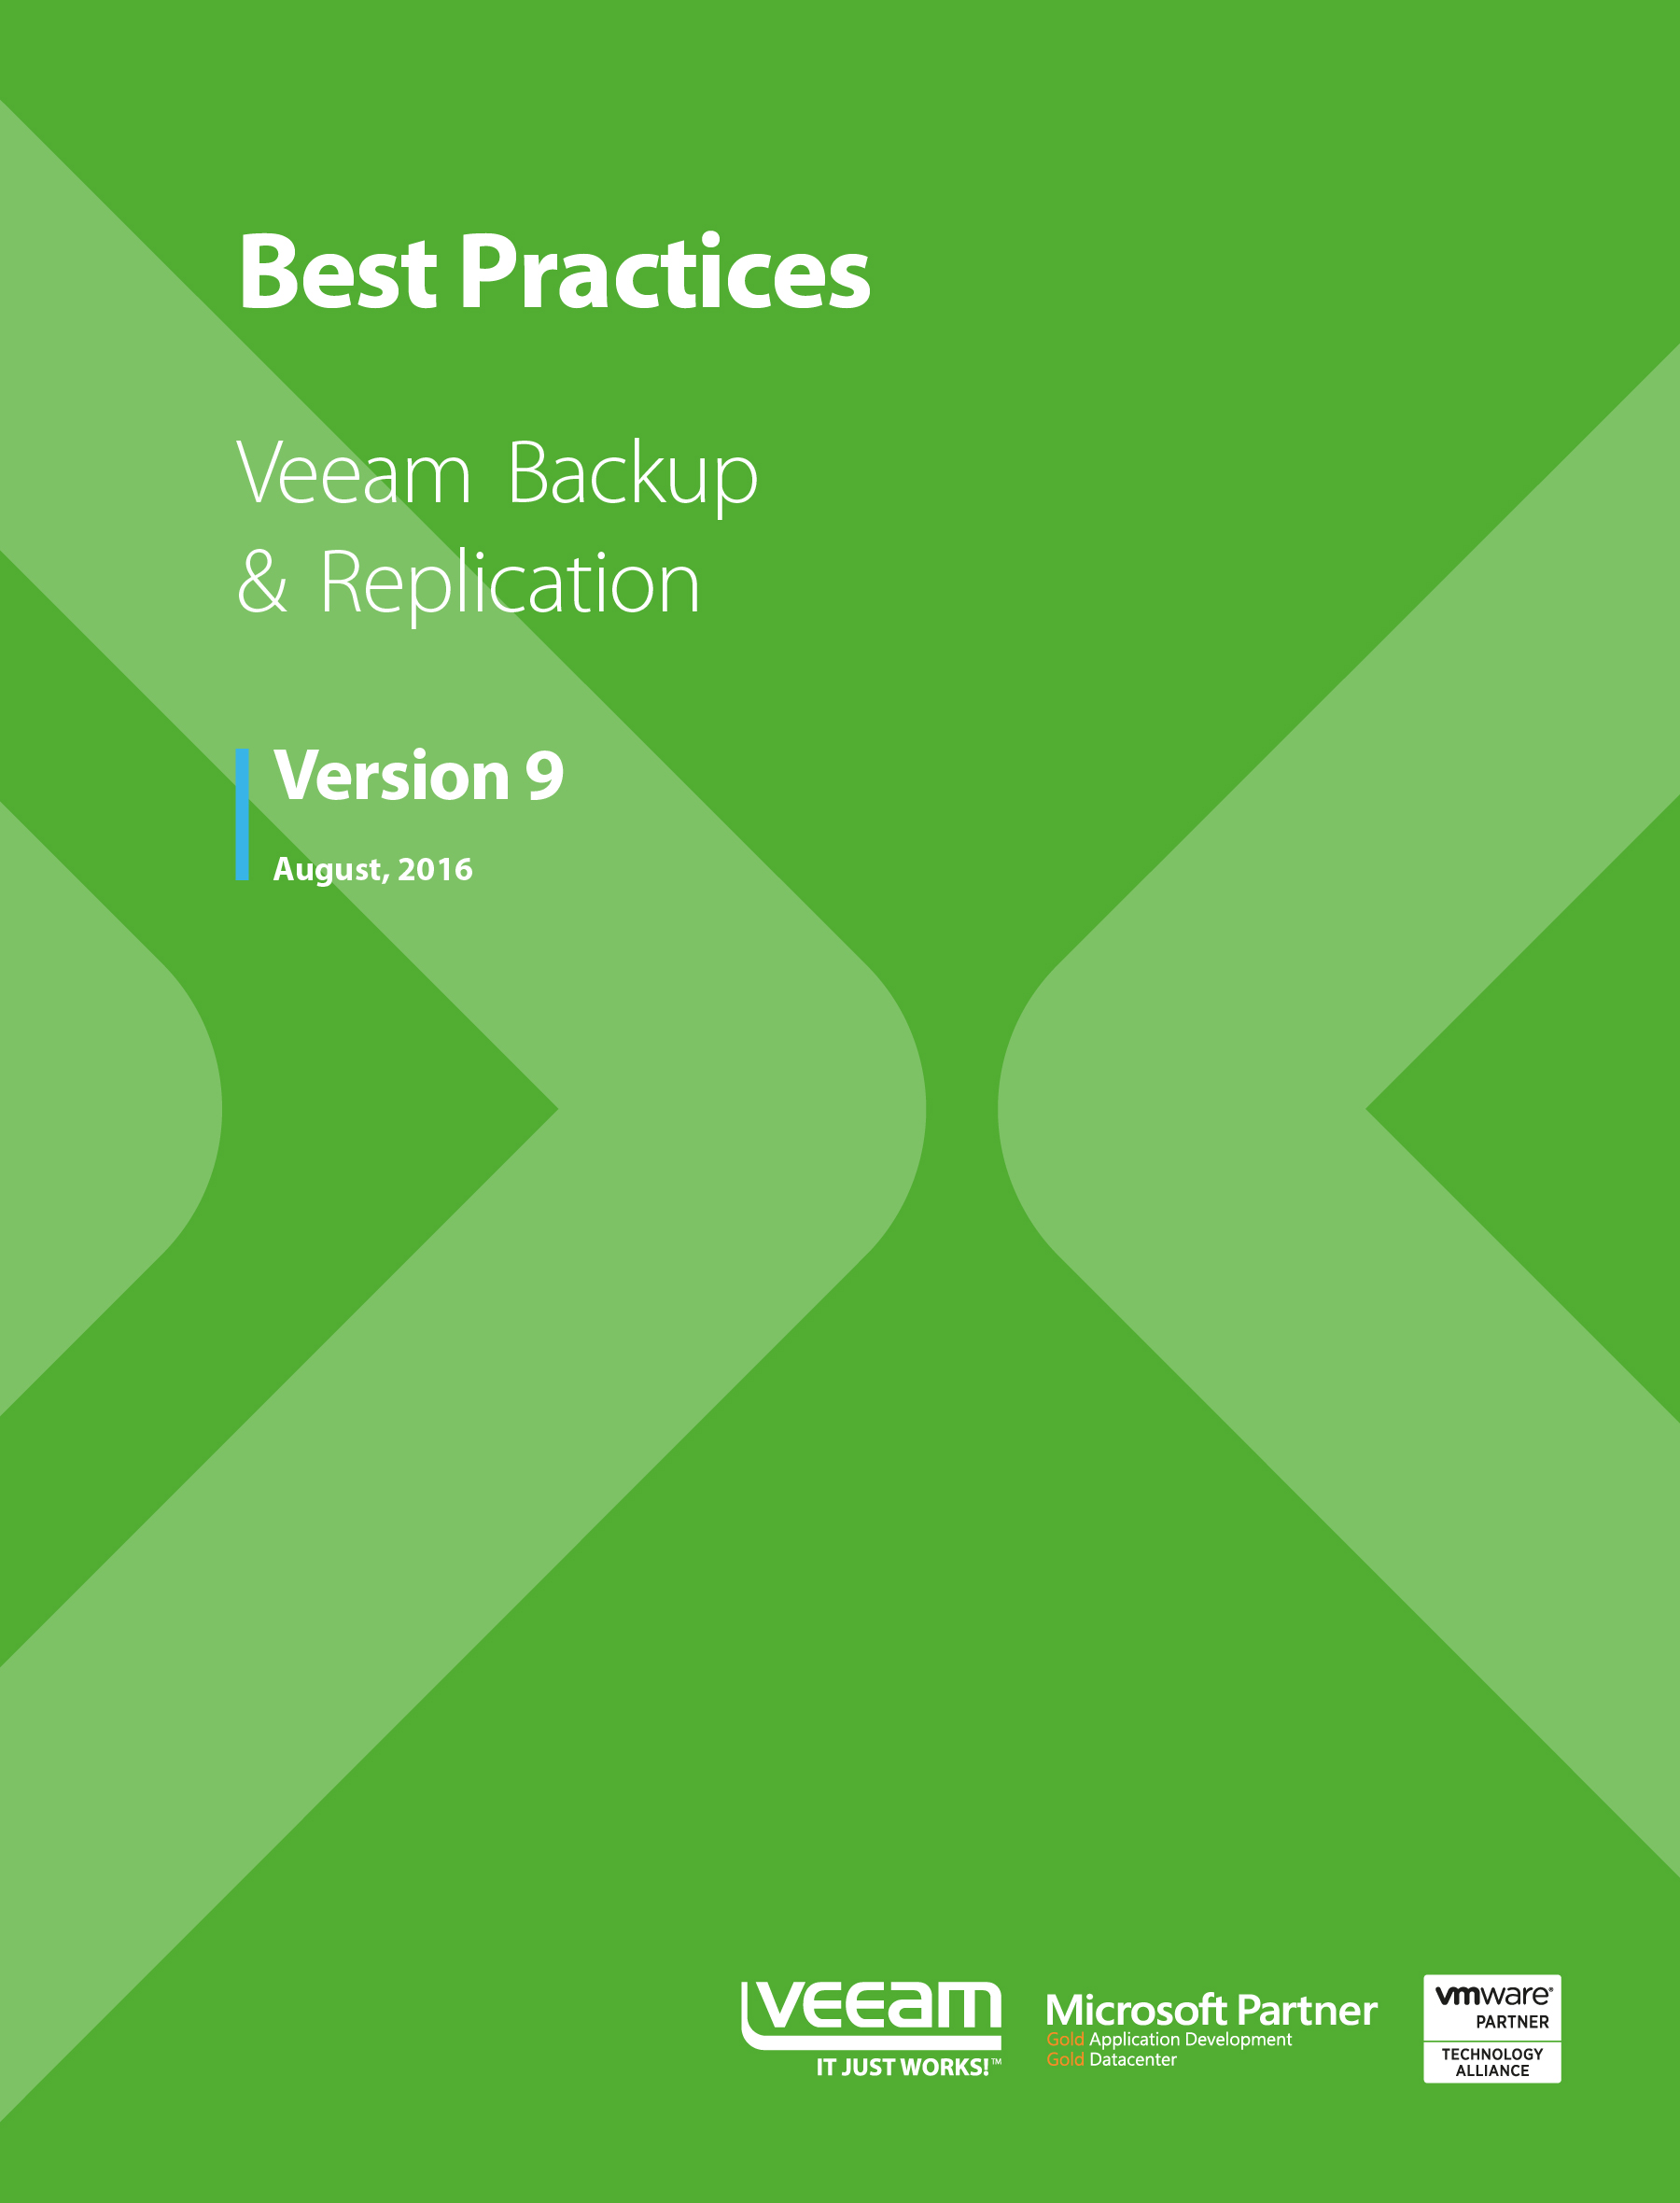 veeam backup and replication 9.5 best practices